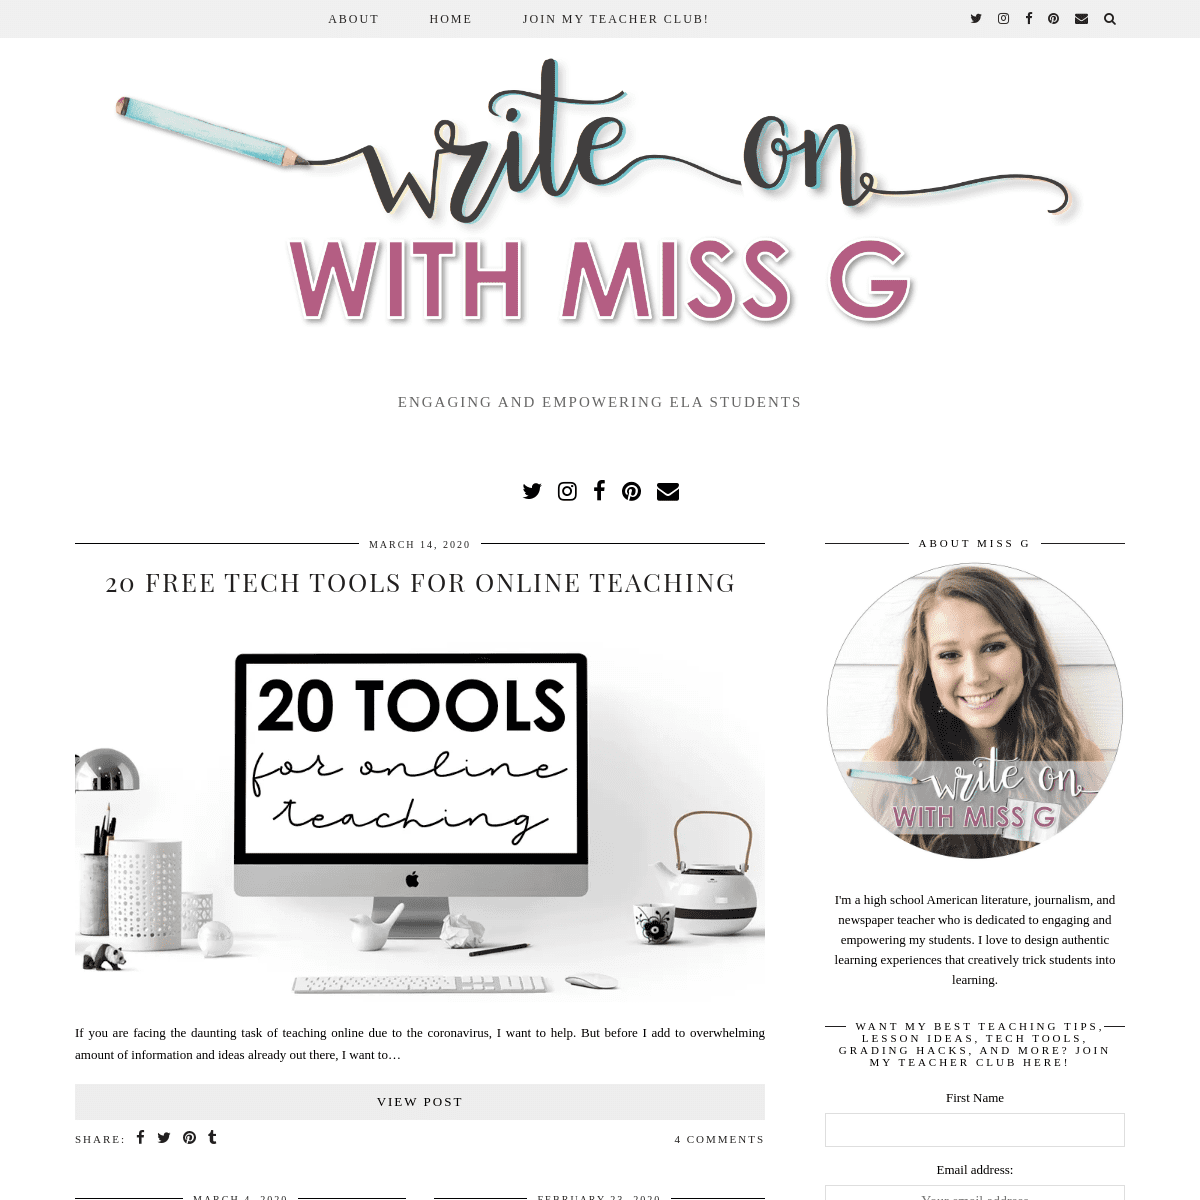 A complete backup of writeonwithmissg.com